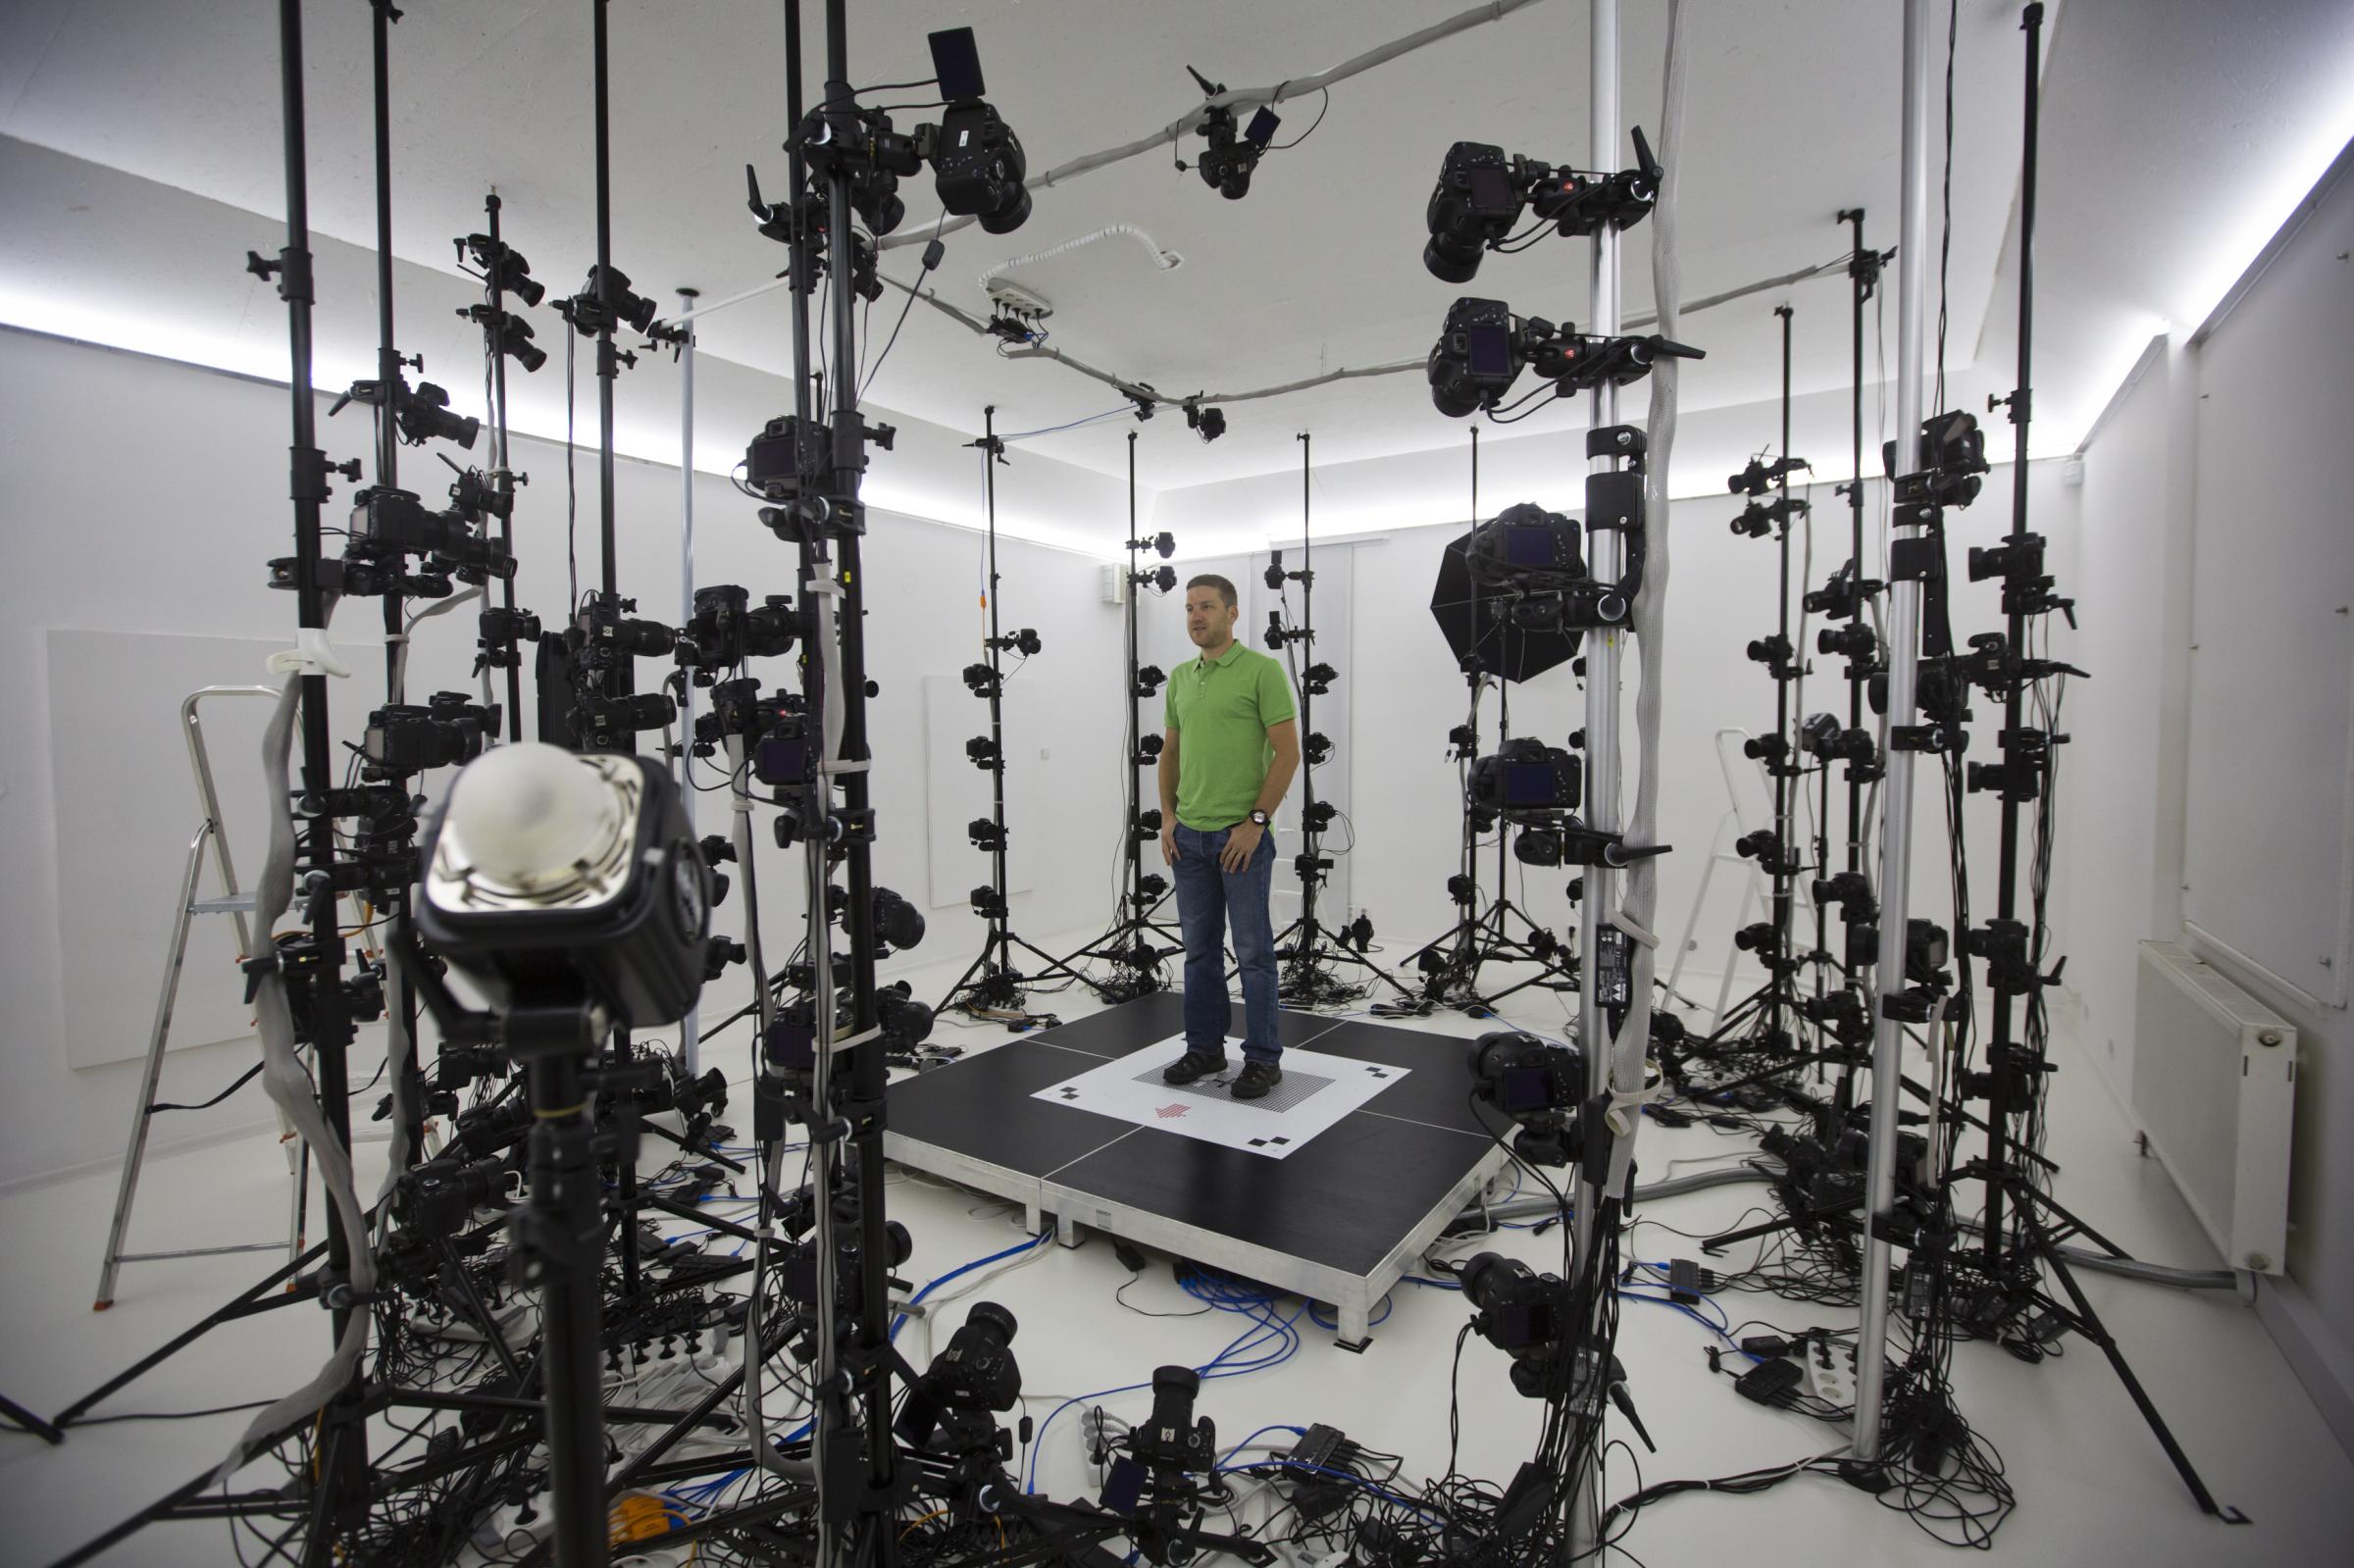 Martin Benes from 3D gang company demonstrates one of the stages of 3D scanning on August 26, 2014 in Prague, Czech Republic. The 3D scanner is the largest in continental Europe, with 115 sensors, and is designed to scan objects, people and animals.